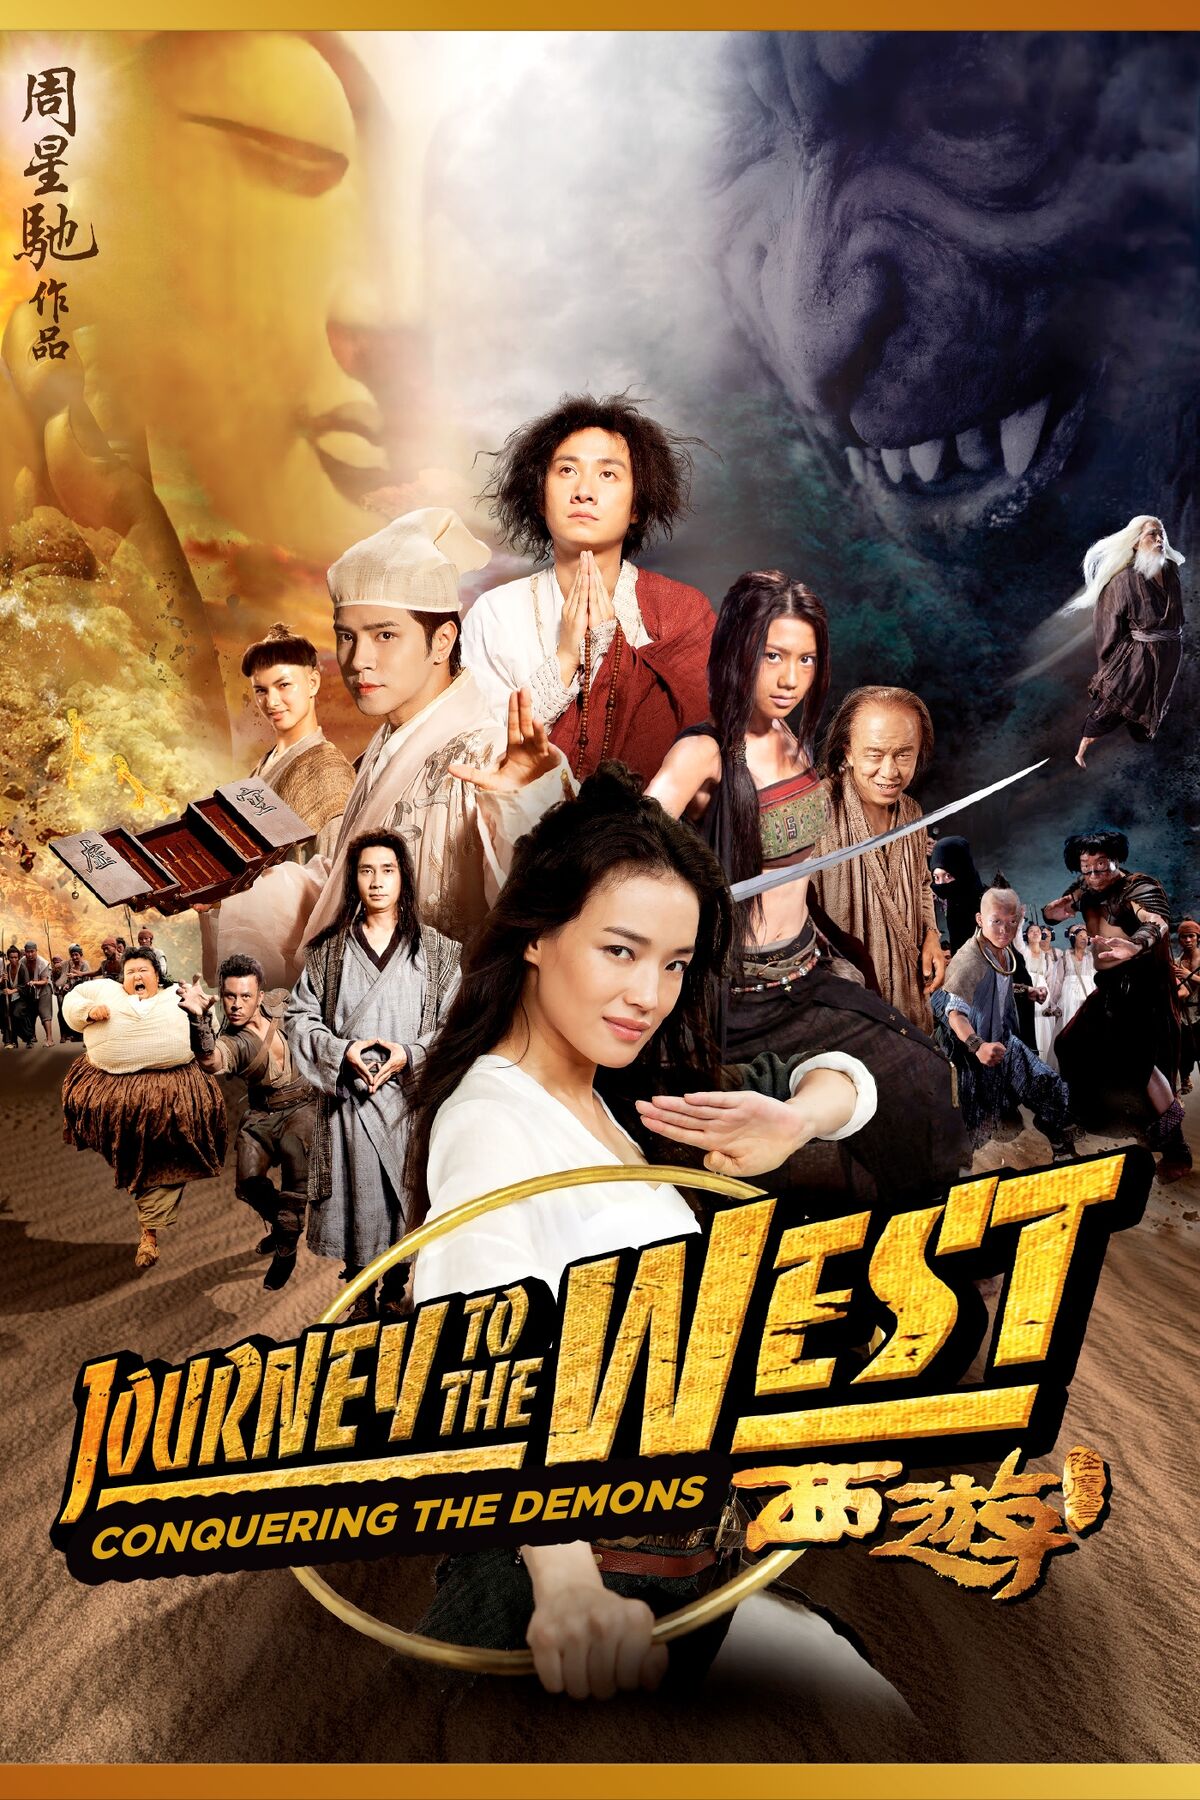 the journey to the west conquering the demons